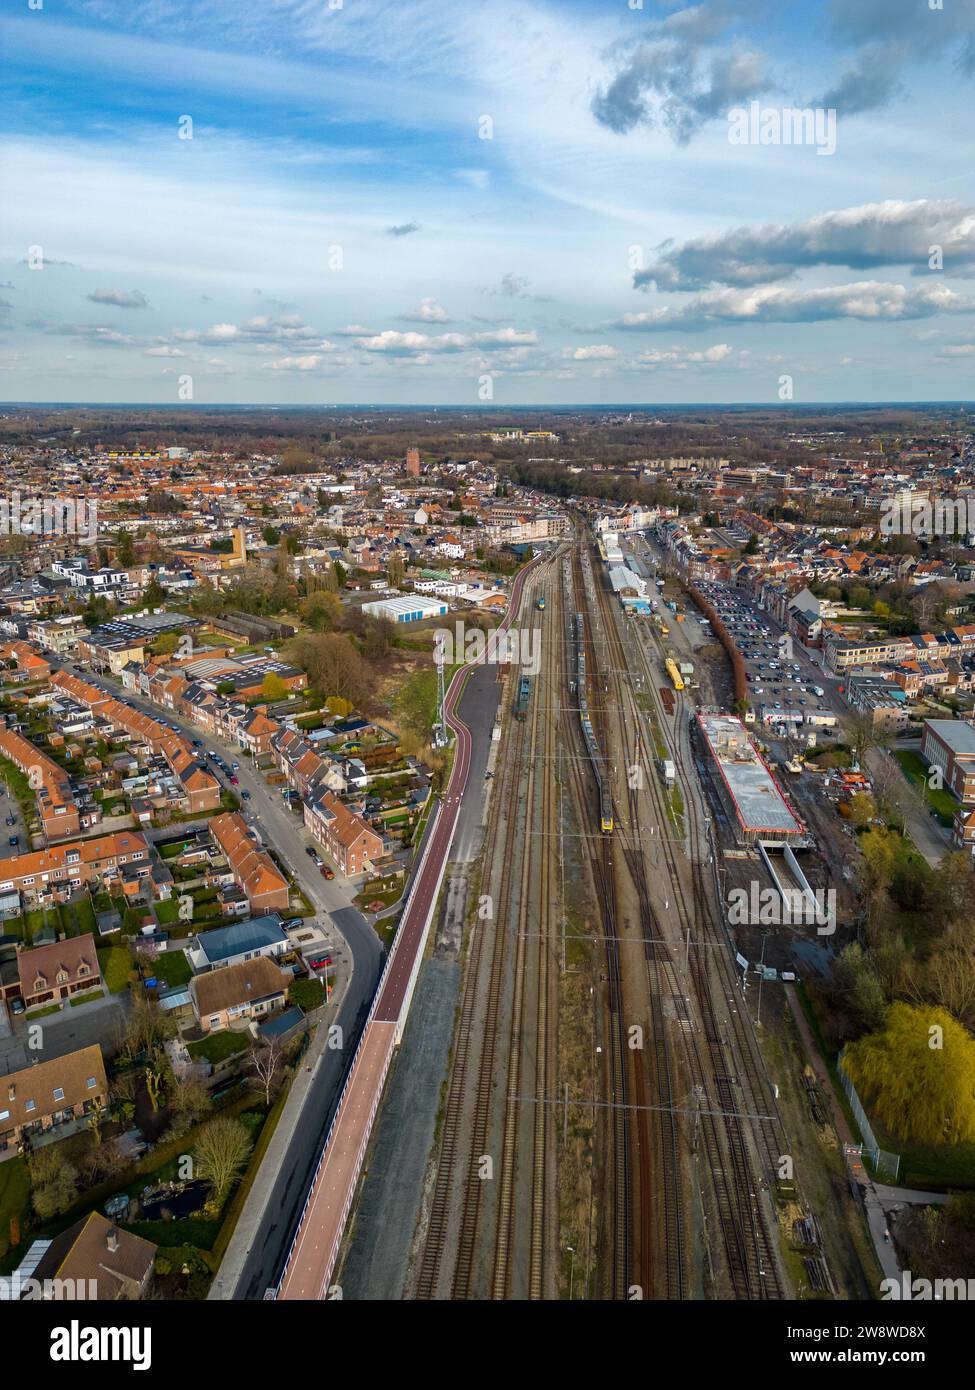 The photograph presents an expansive aerial view over Lier Railway Station in Belgium. The station is a focal point with multiple railway lines converging, surrounded by the urban layout of the city. Residential areas with dense housing, intersected by roadways, are visible, along with patches of greenery providing a contrast to the urban environment. The horizon stretches far, showcasing the town's scale and the open sky above, with scattered clouds casting shadows over the landscape. Aerial View of Lier Railway Station, Belgium. High quality photo Stock Photo